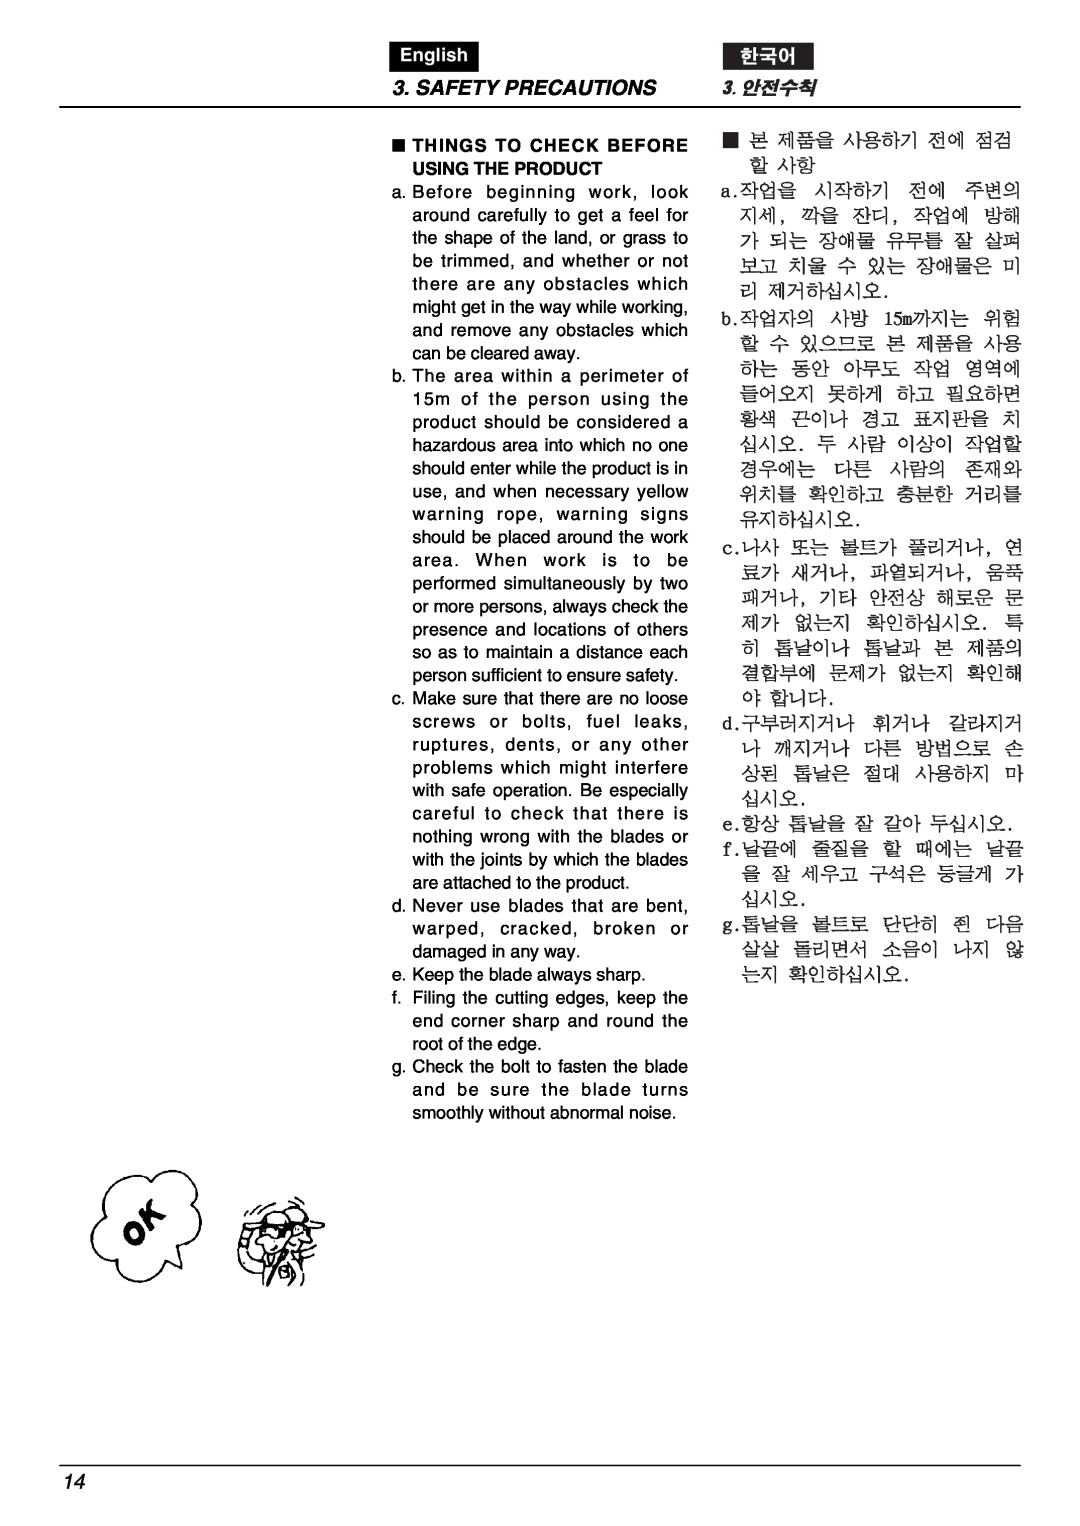 Zenoah BK2650DL-Hb owner manual Safety Precautions, English, Things To Check Before Using The Product 